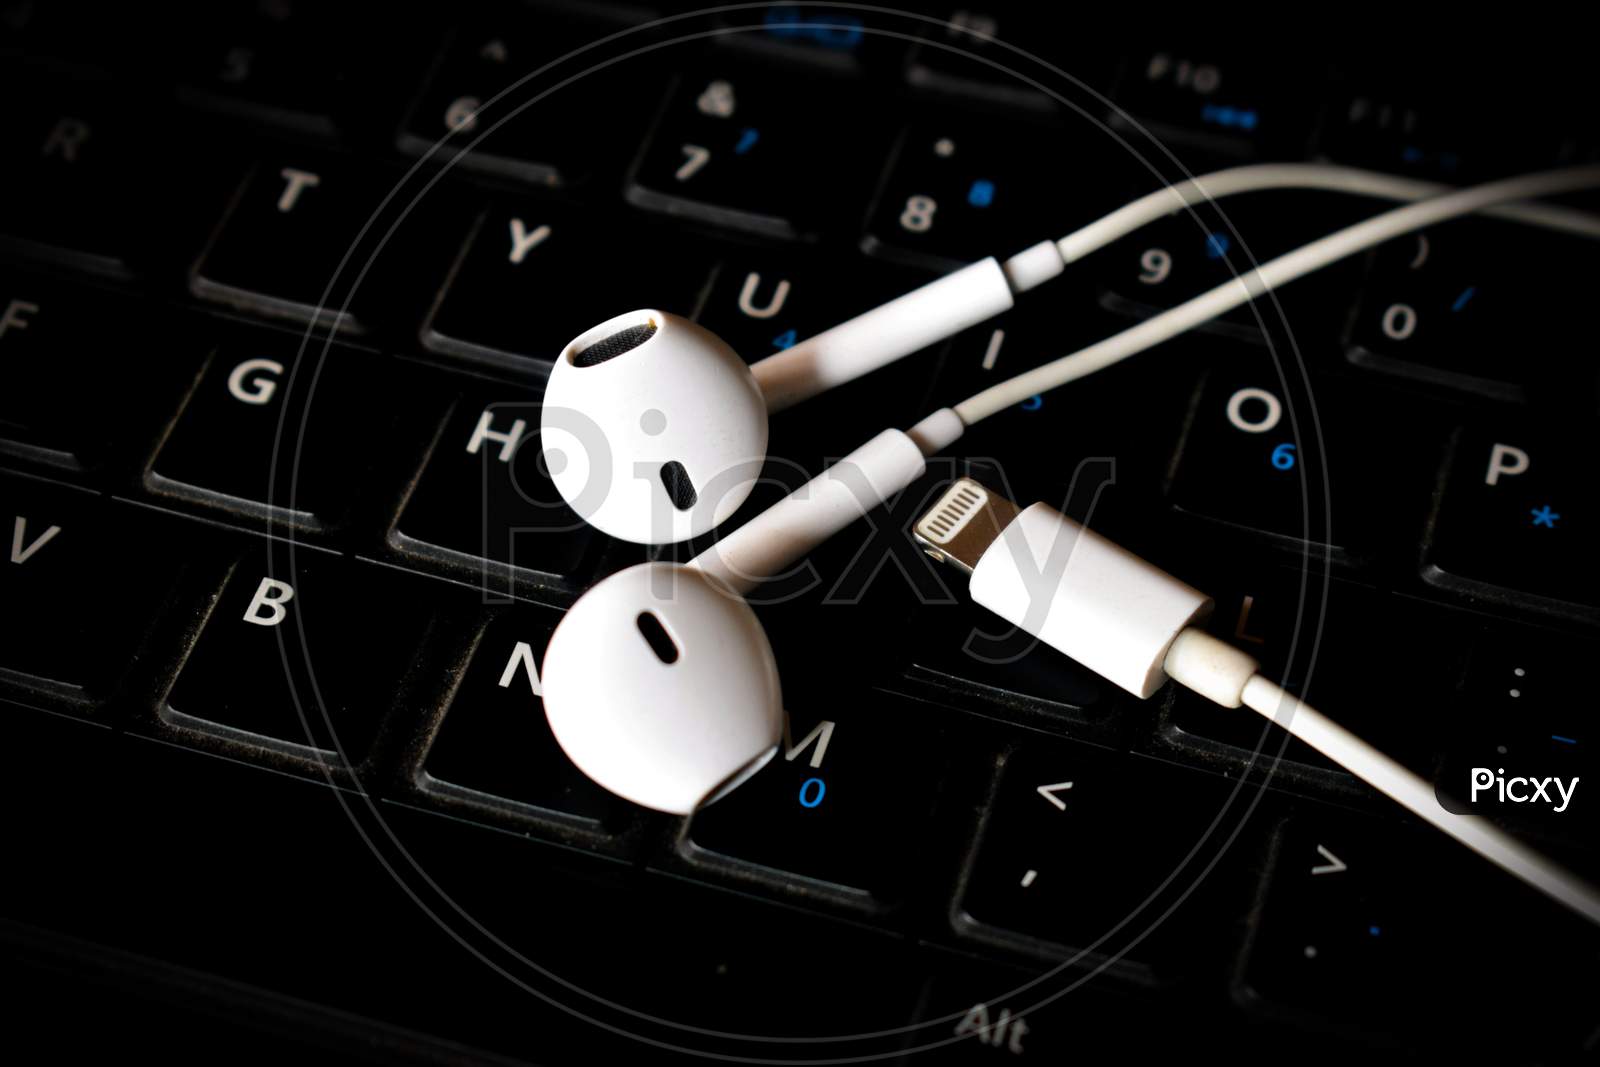 A wired headphones of Apple company